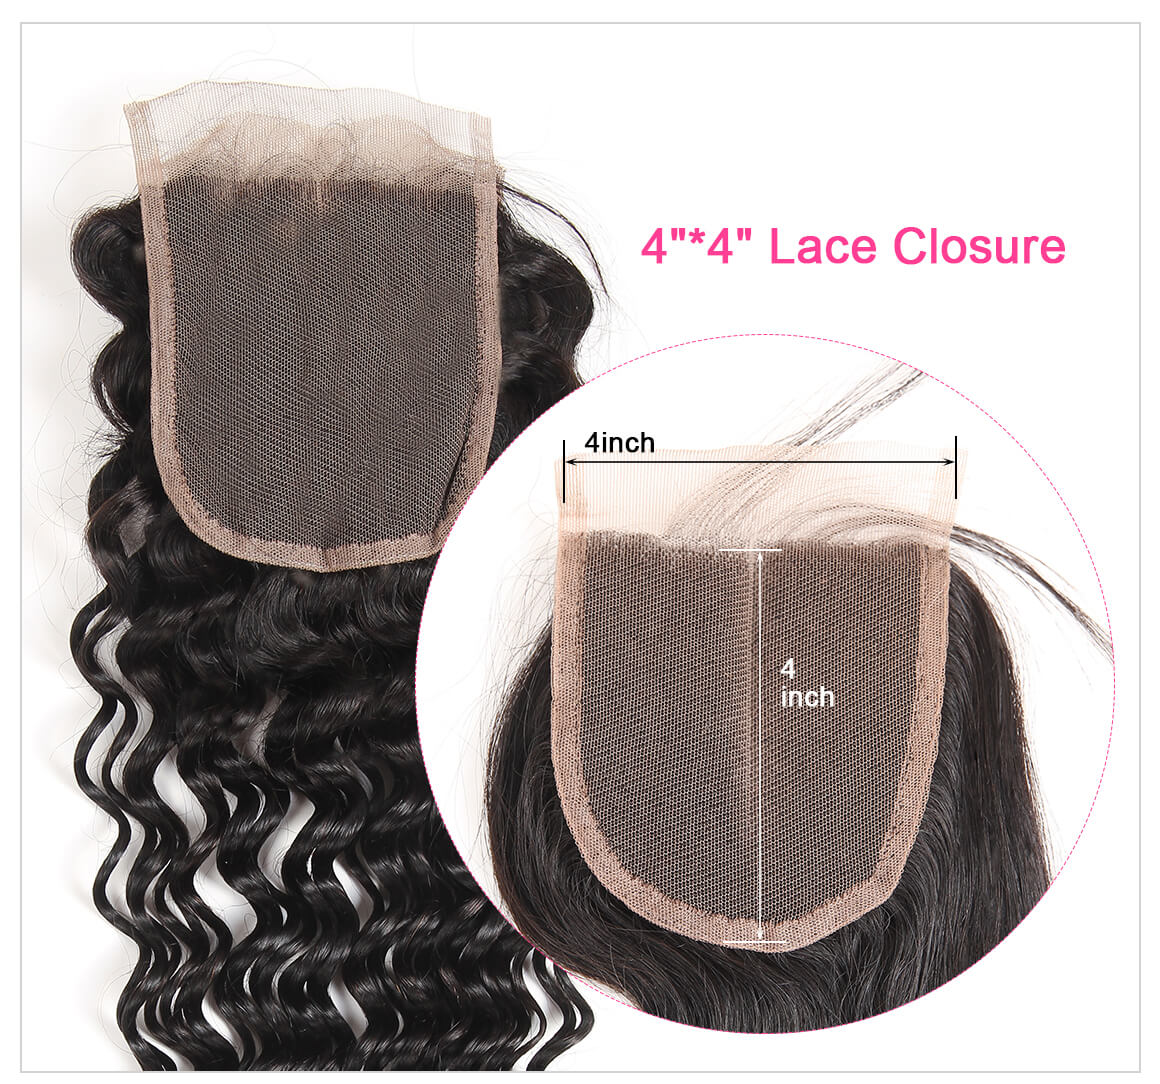 Deep Wave with Lace Closure